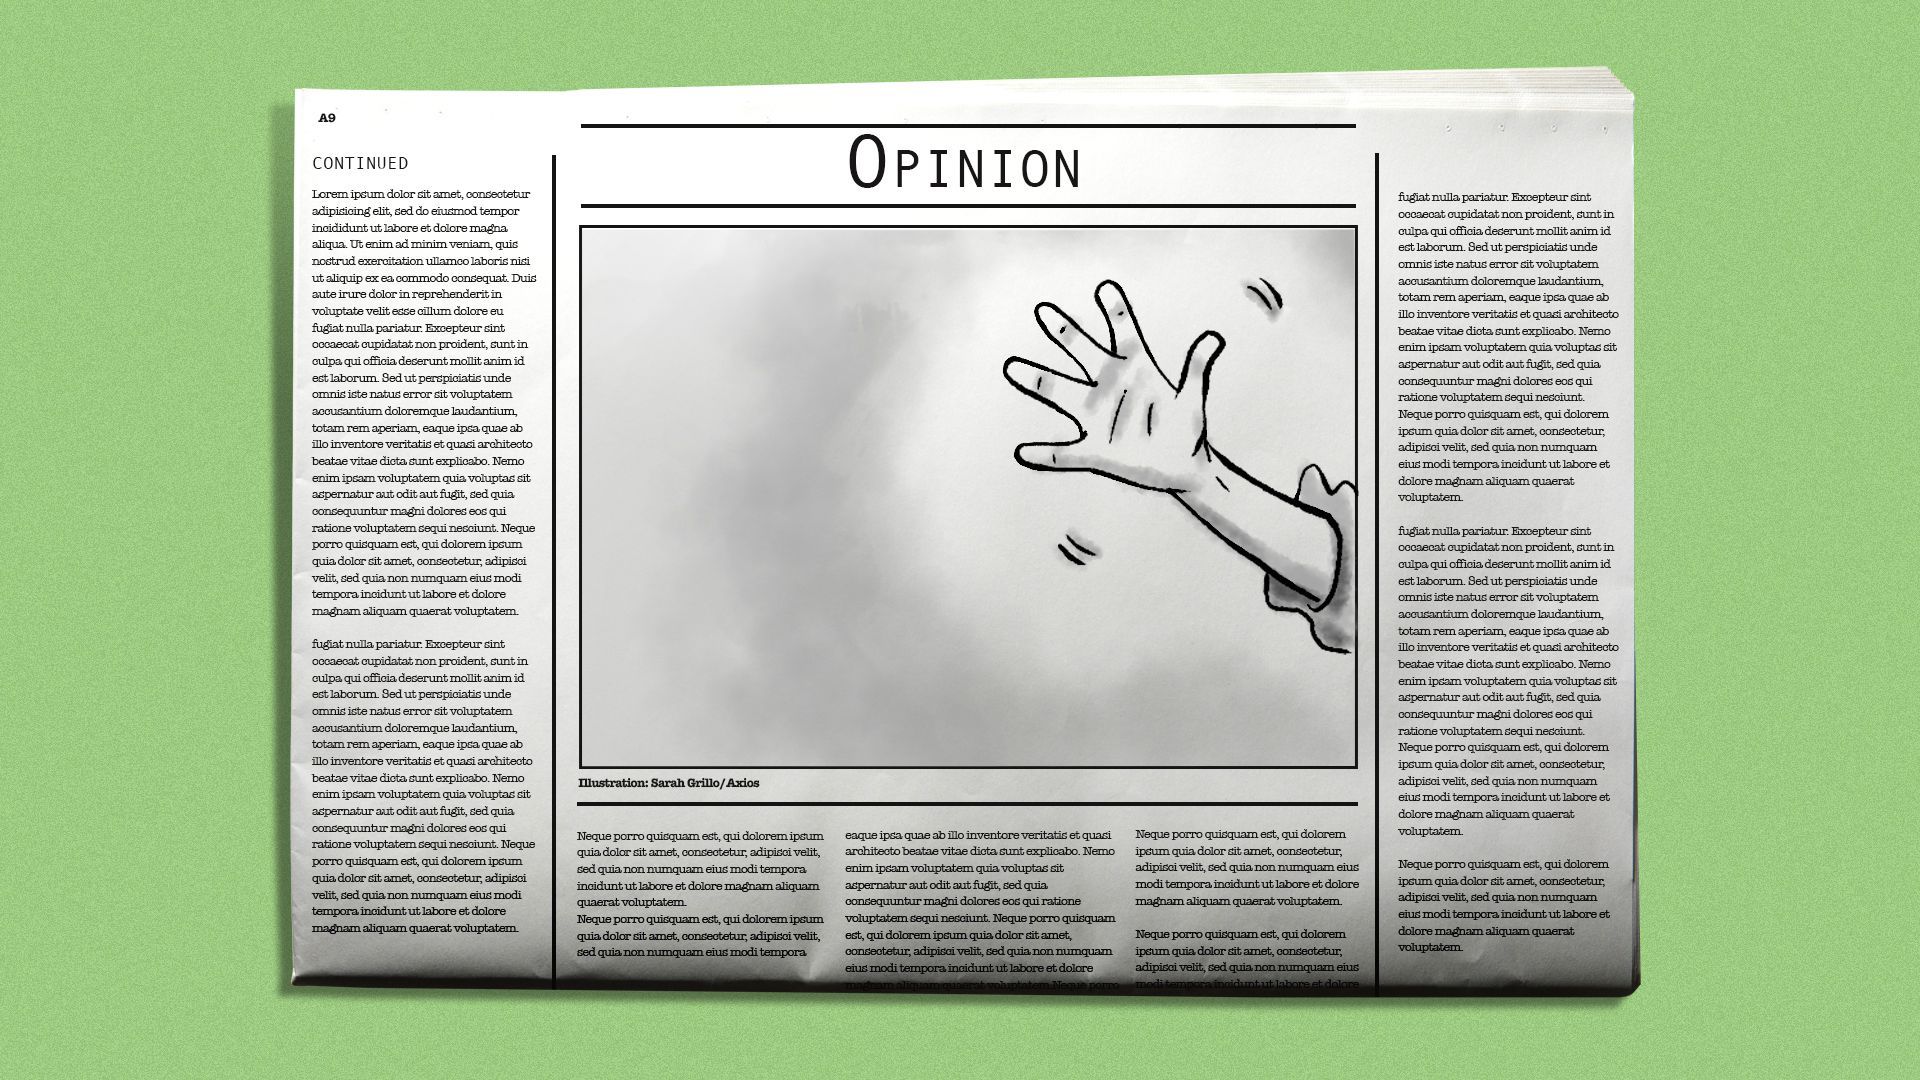 Illustration of a cartoon hand waving goodbye on the opinion section of a newspaper